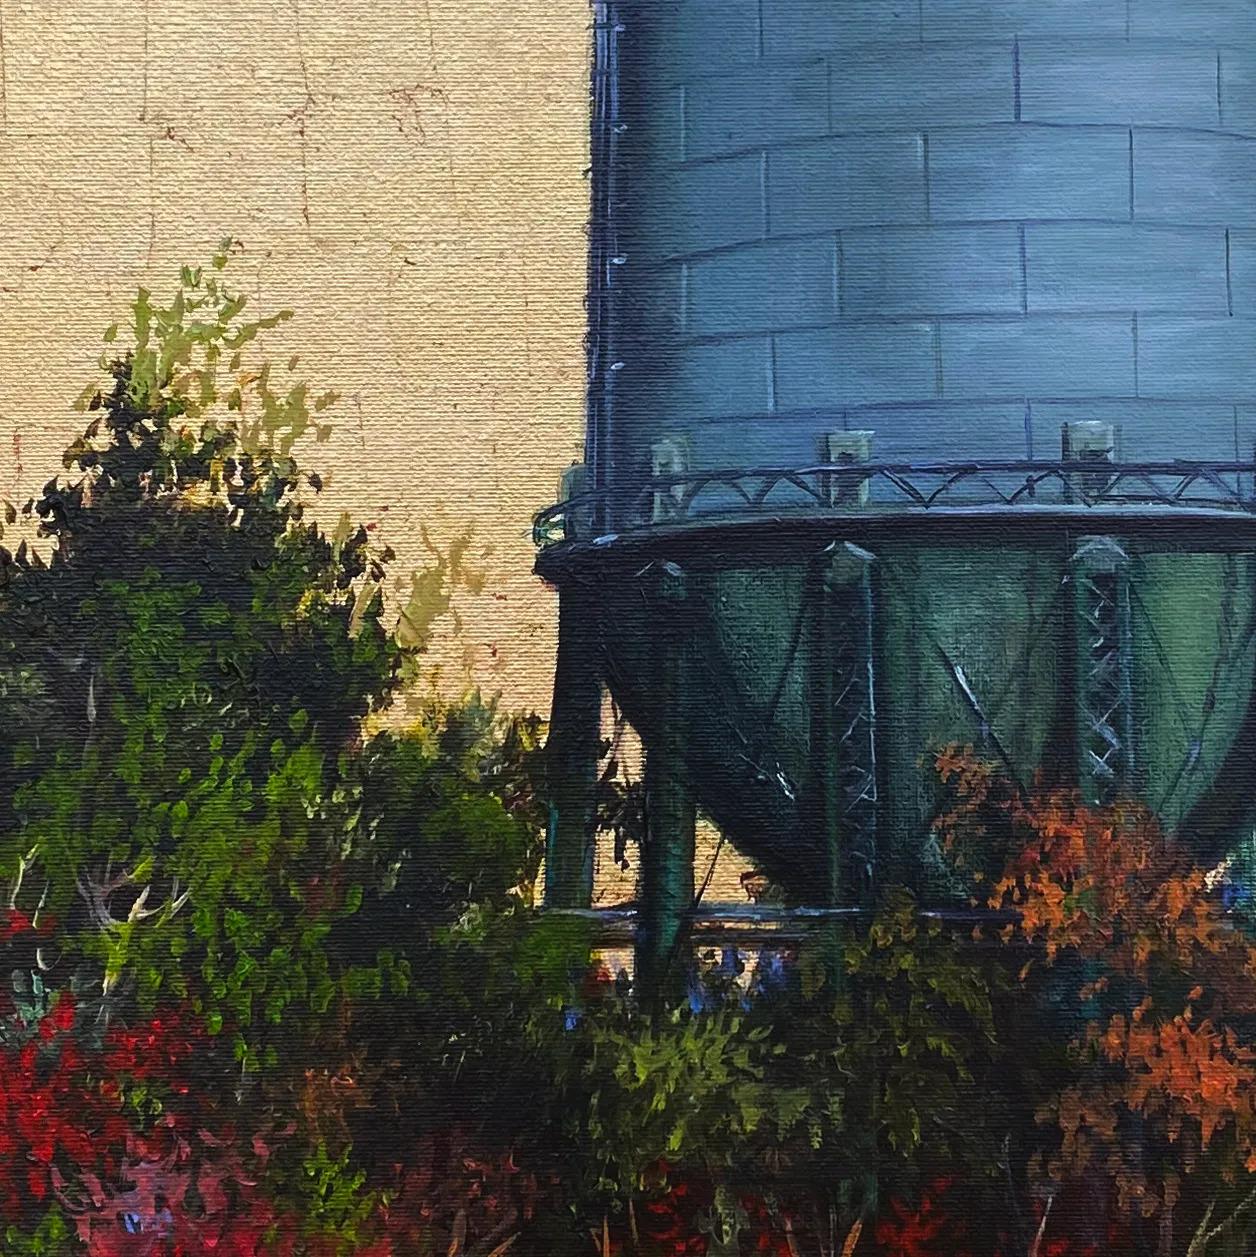 I love this tower. I first painted it as far back as 1994 when I worked mainly in watercolors. I’ve known it for over 30 years. I played in a soccer league there and attended a workshop, and I even witnessed a dear friend propose to his future wife